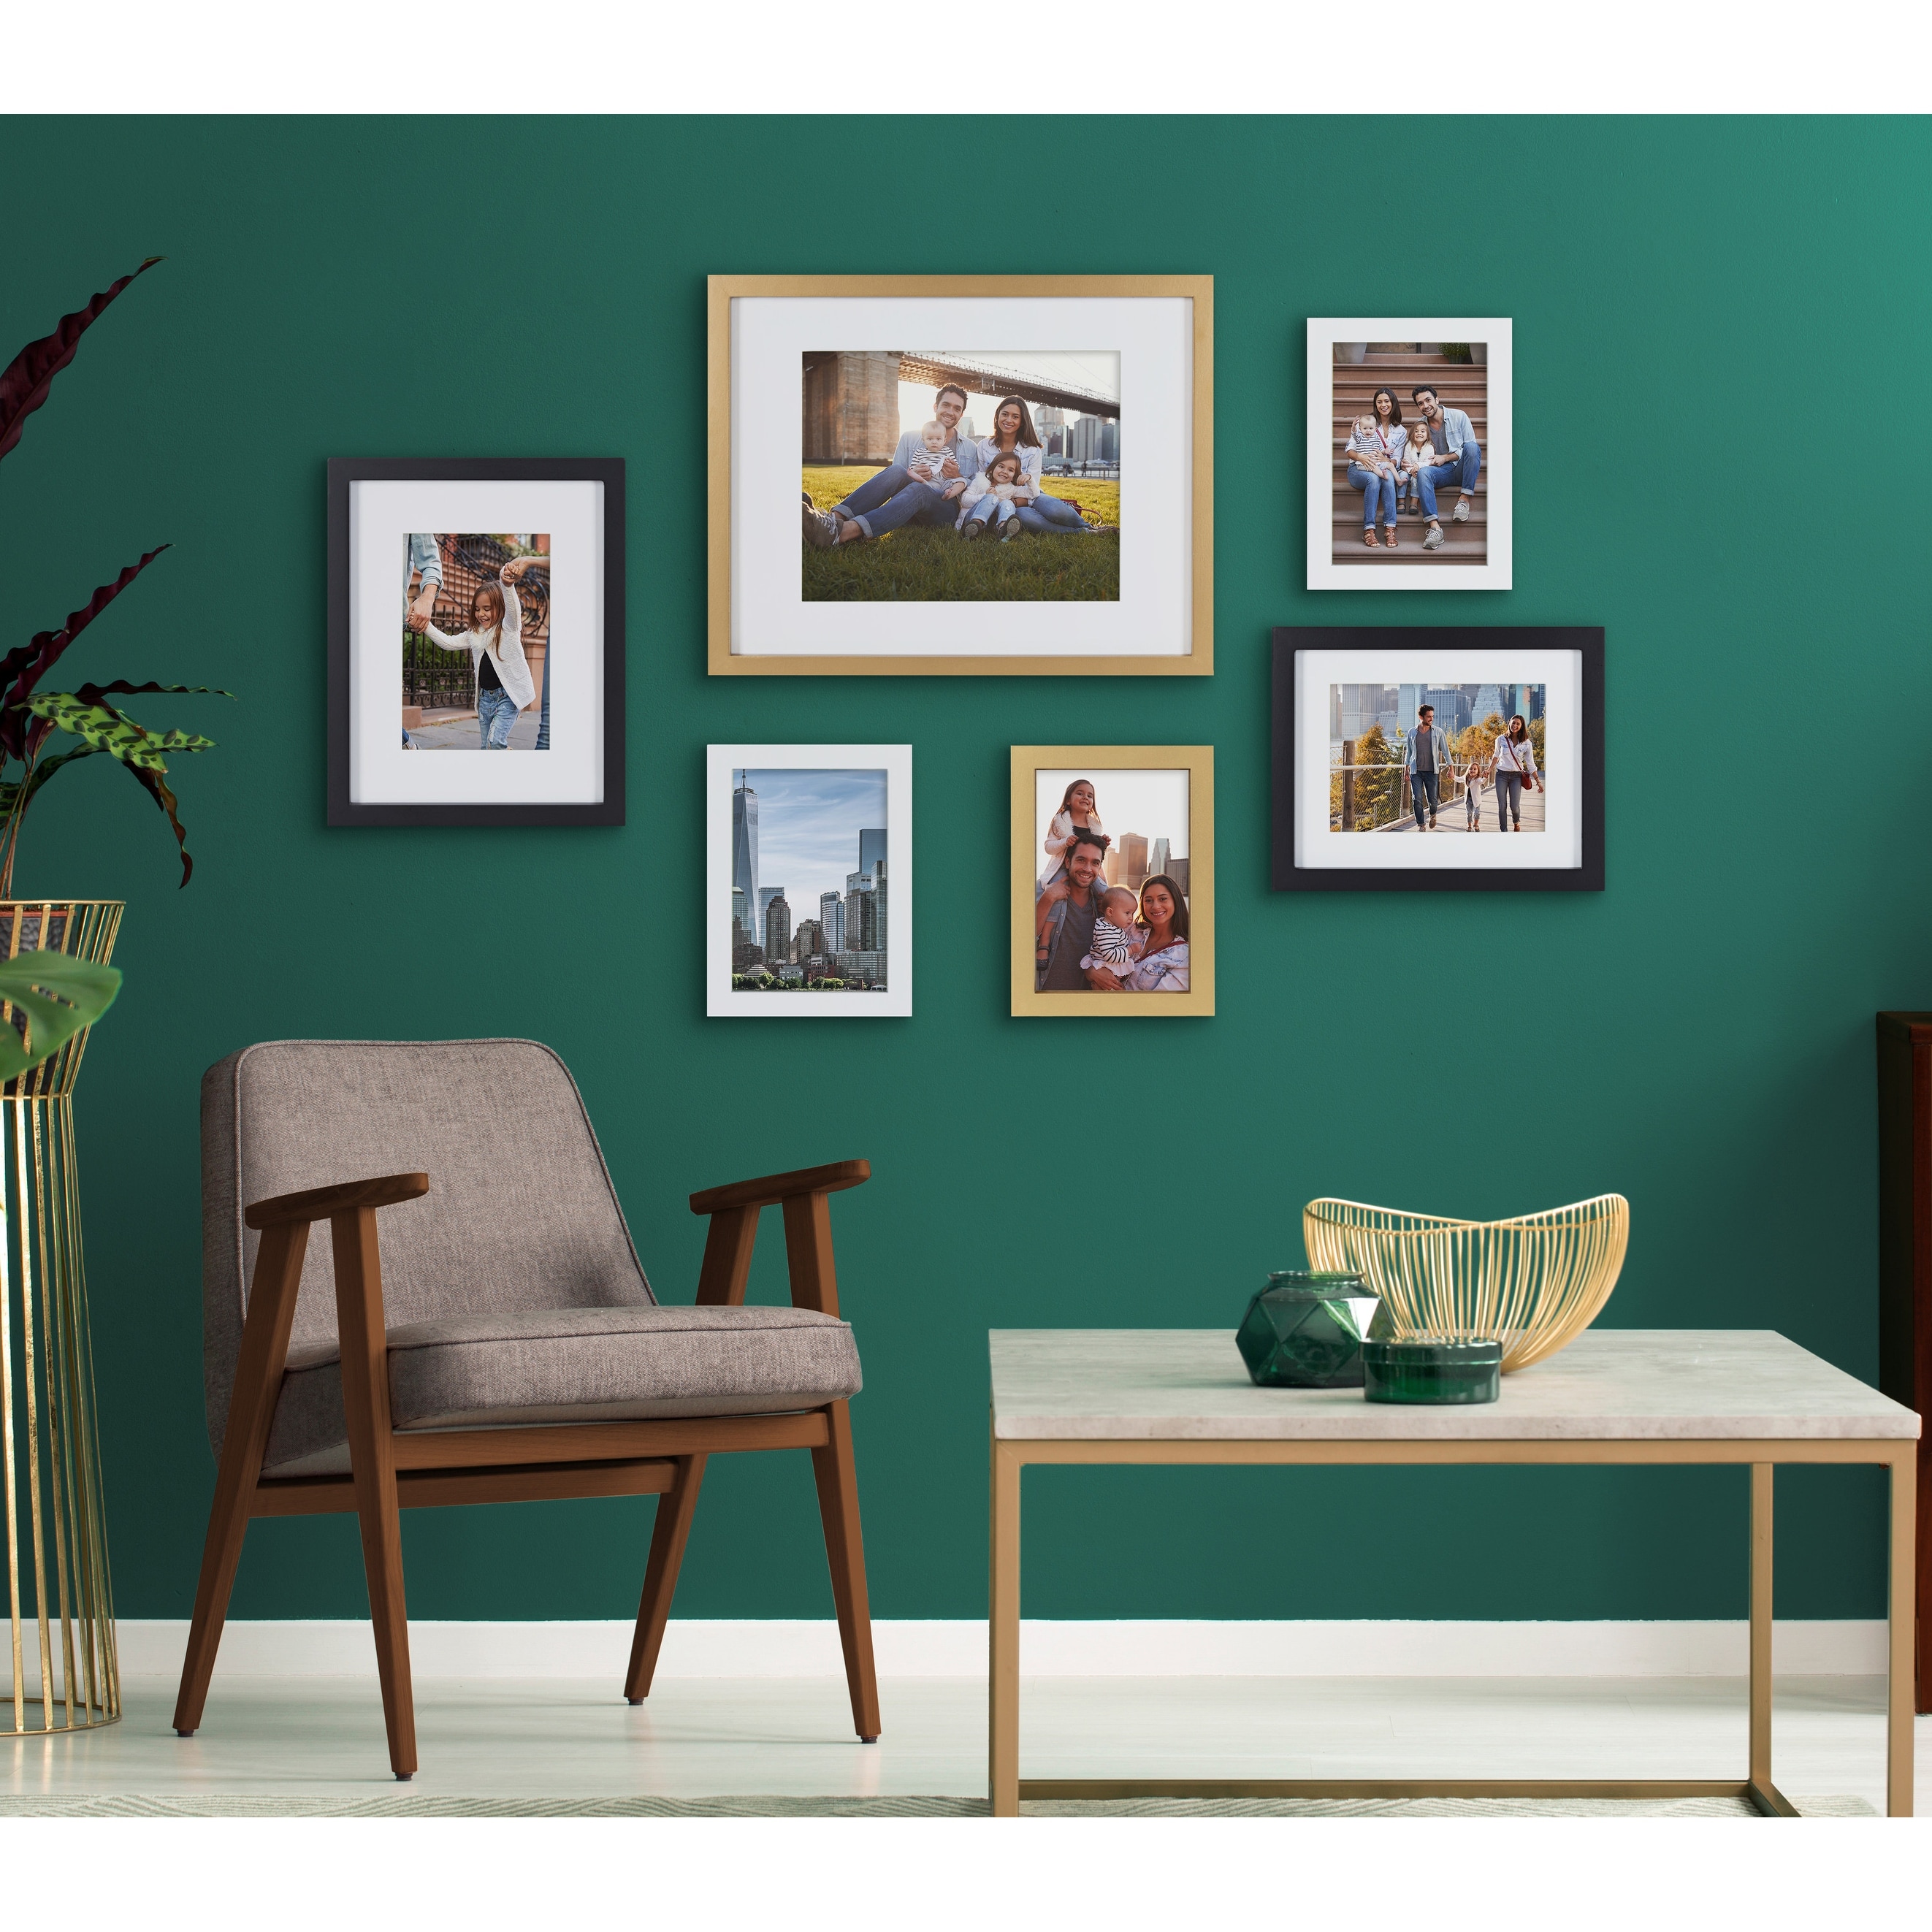 https://ak1.ostkcdn.com/images/products/is/images/direct/b24974a1a5a85c89a606756c8f17f58161e9e3b2/Kate-and-Laurel-Gallery-Wall-Frame-Set.jpg